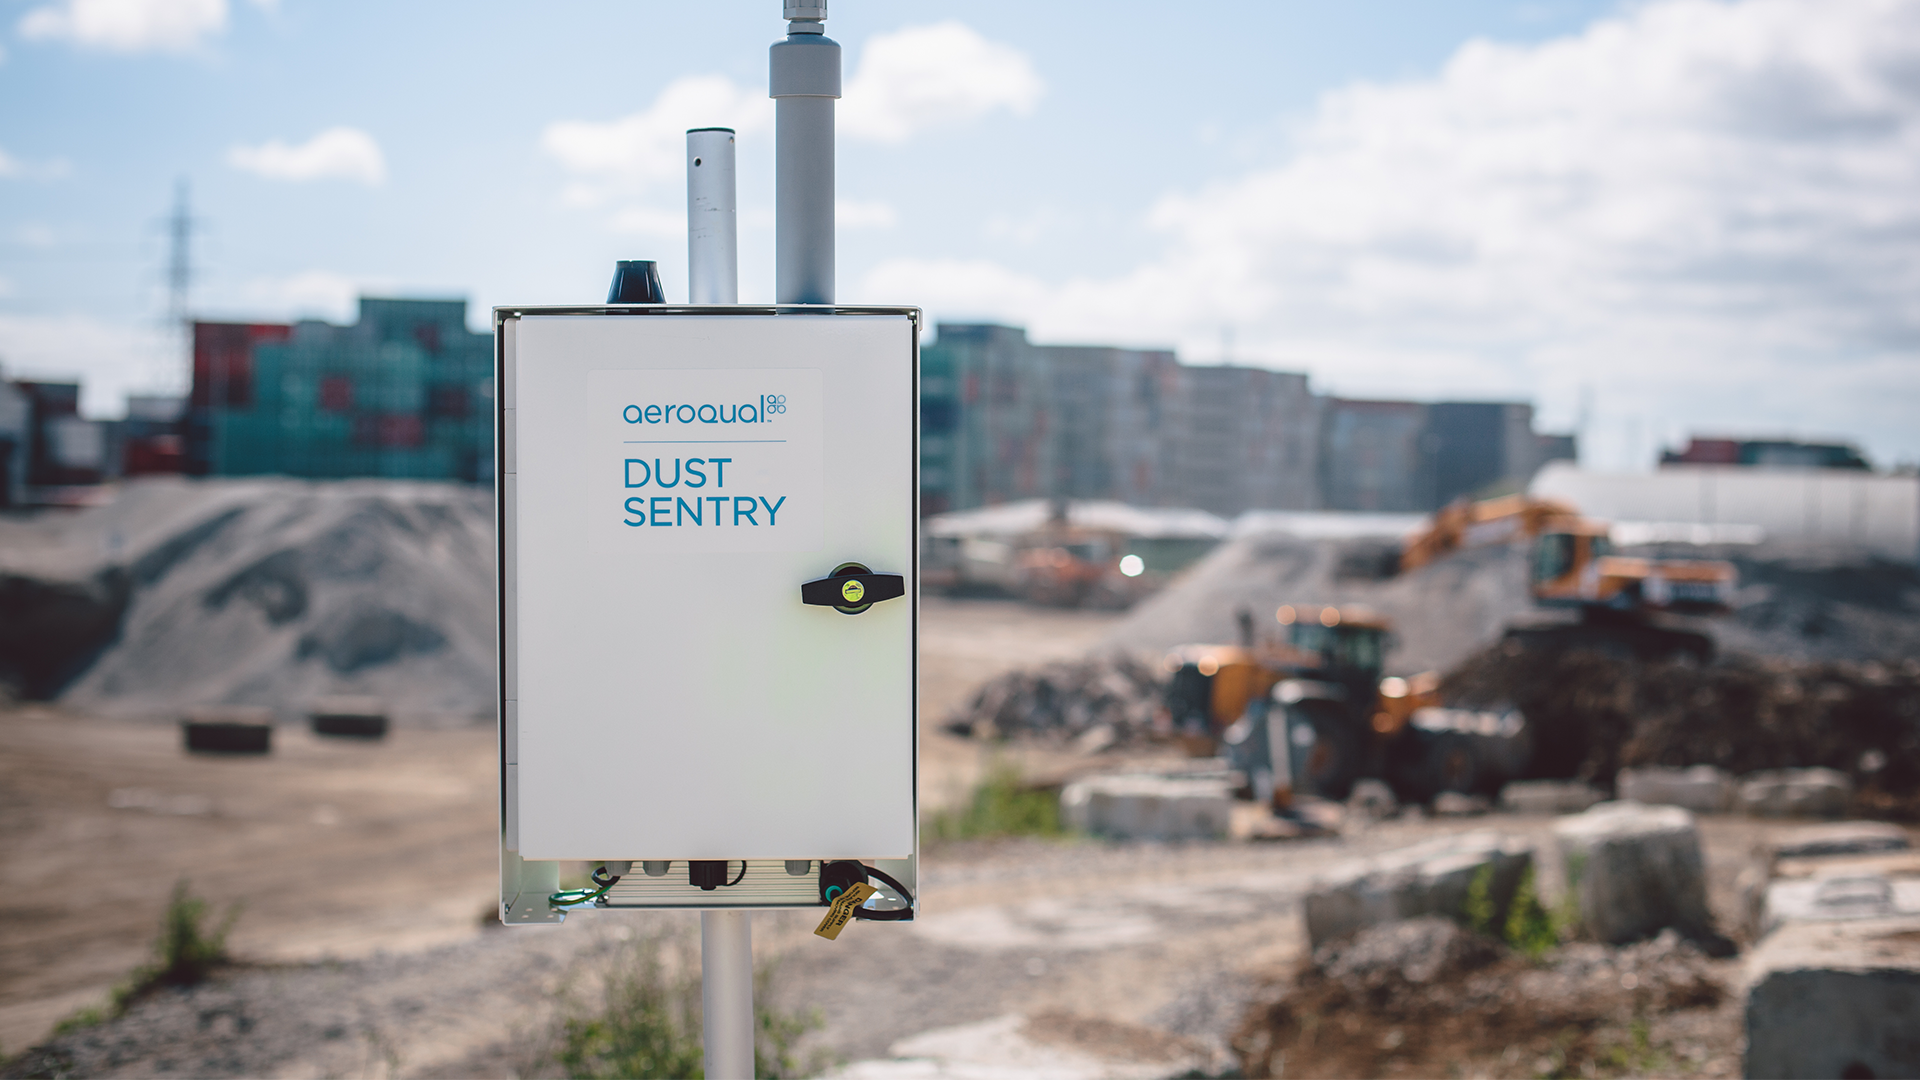 Dust Sentry or Dust Sentry Pro – Which dust monitor is right for you?